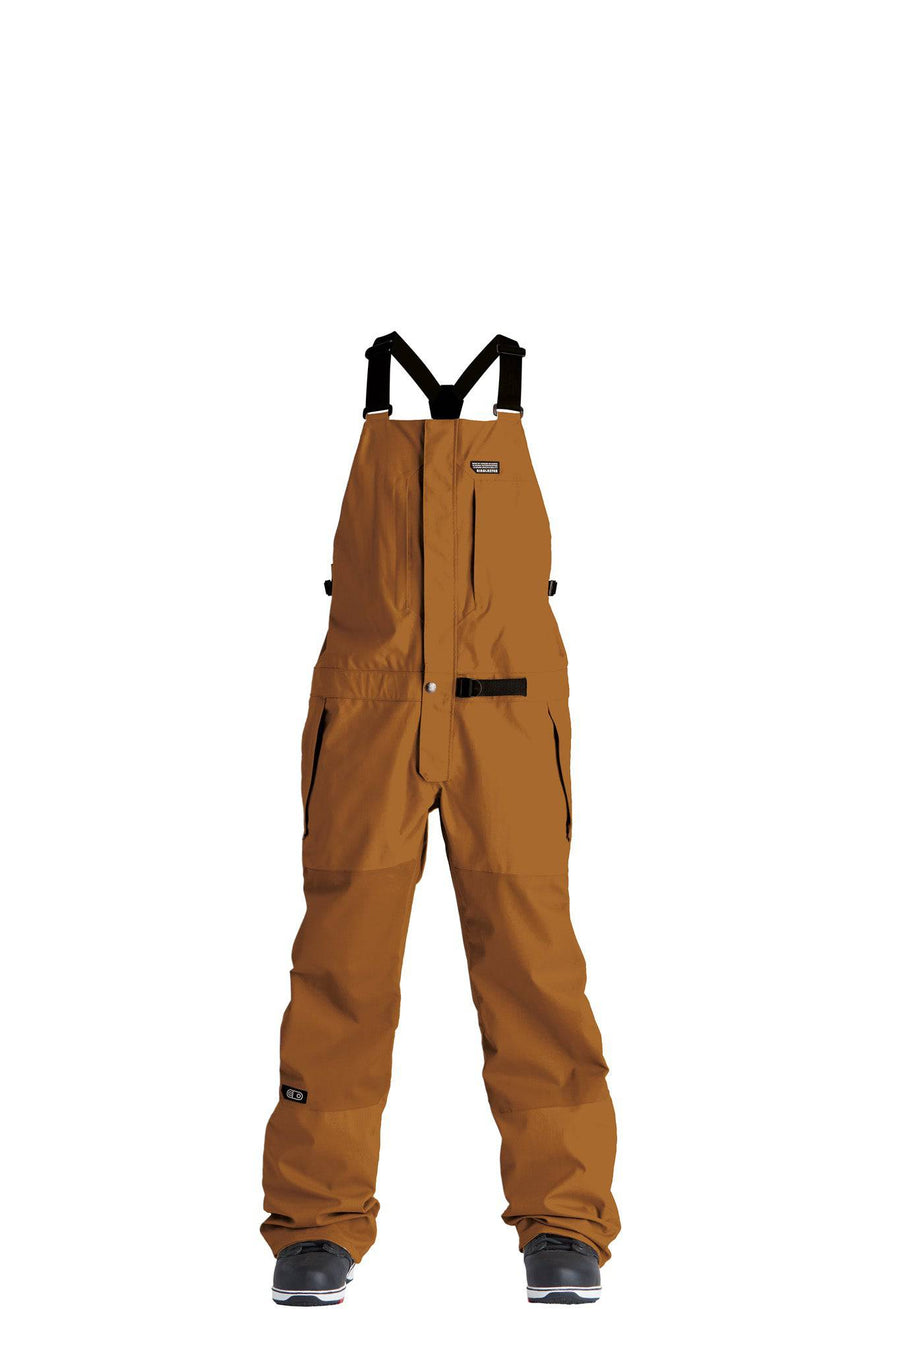 2022 Airblaster Stretch Krill Bib Snow Pant in Grizzly